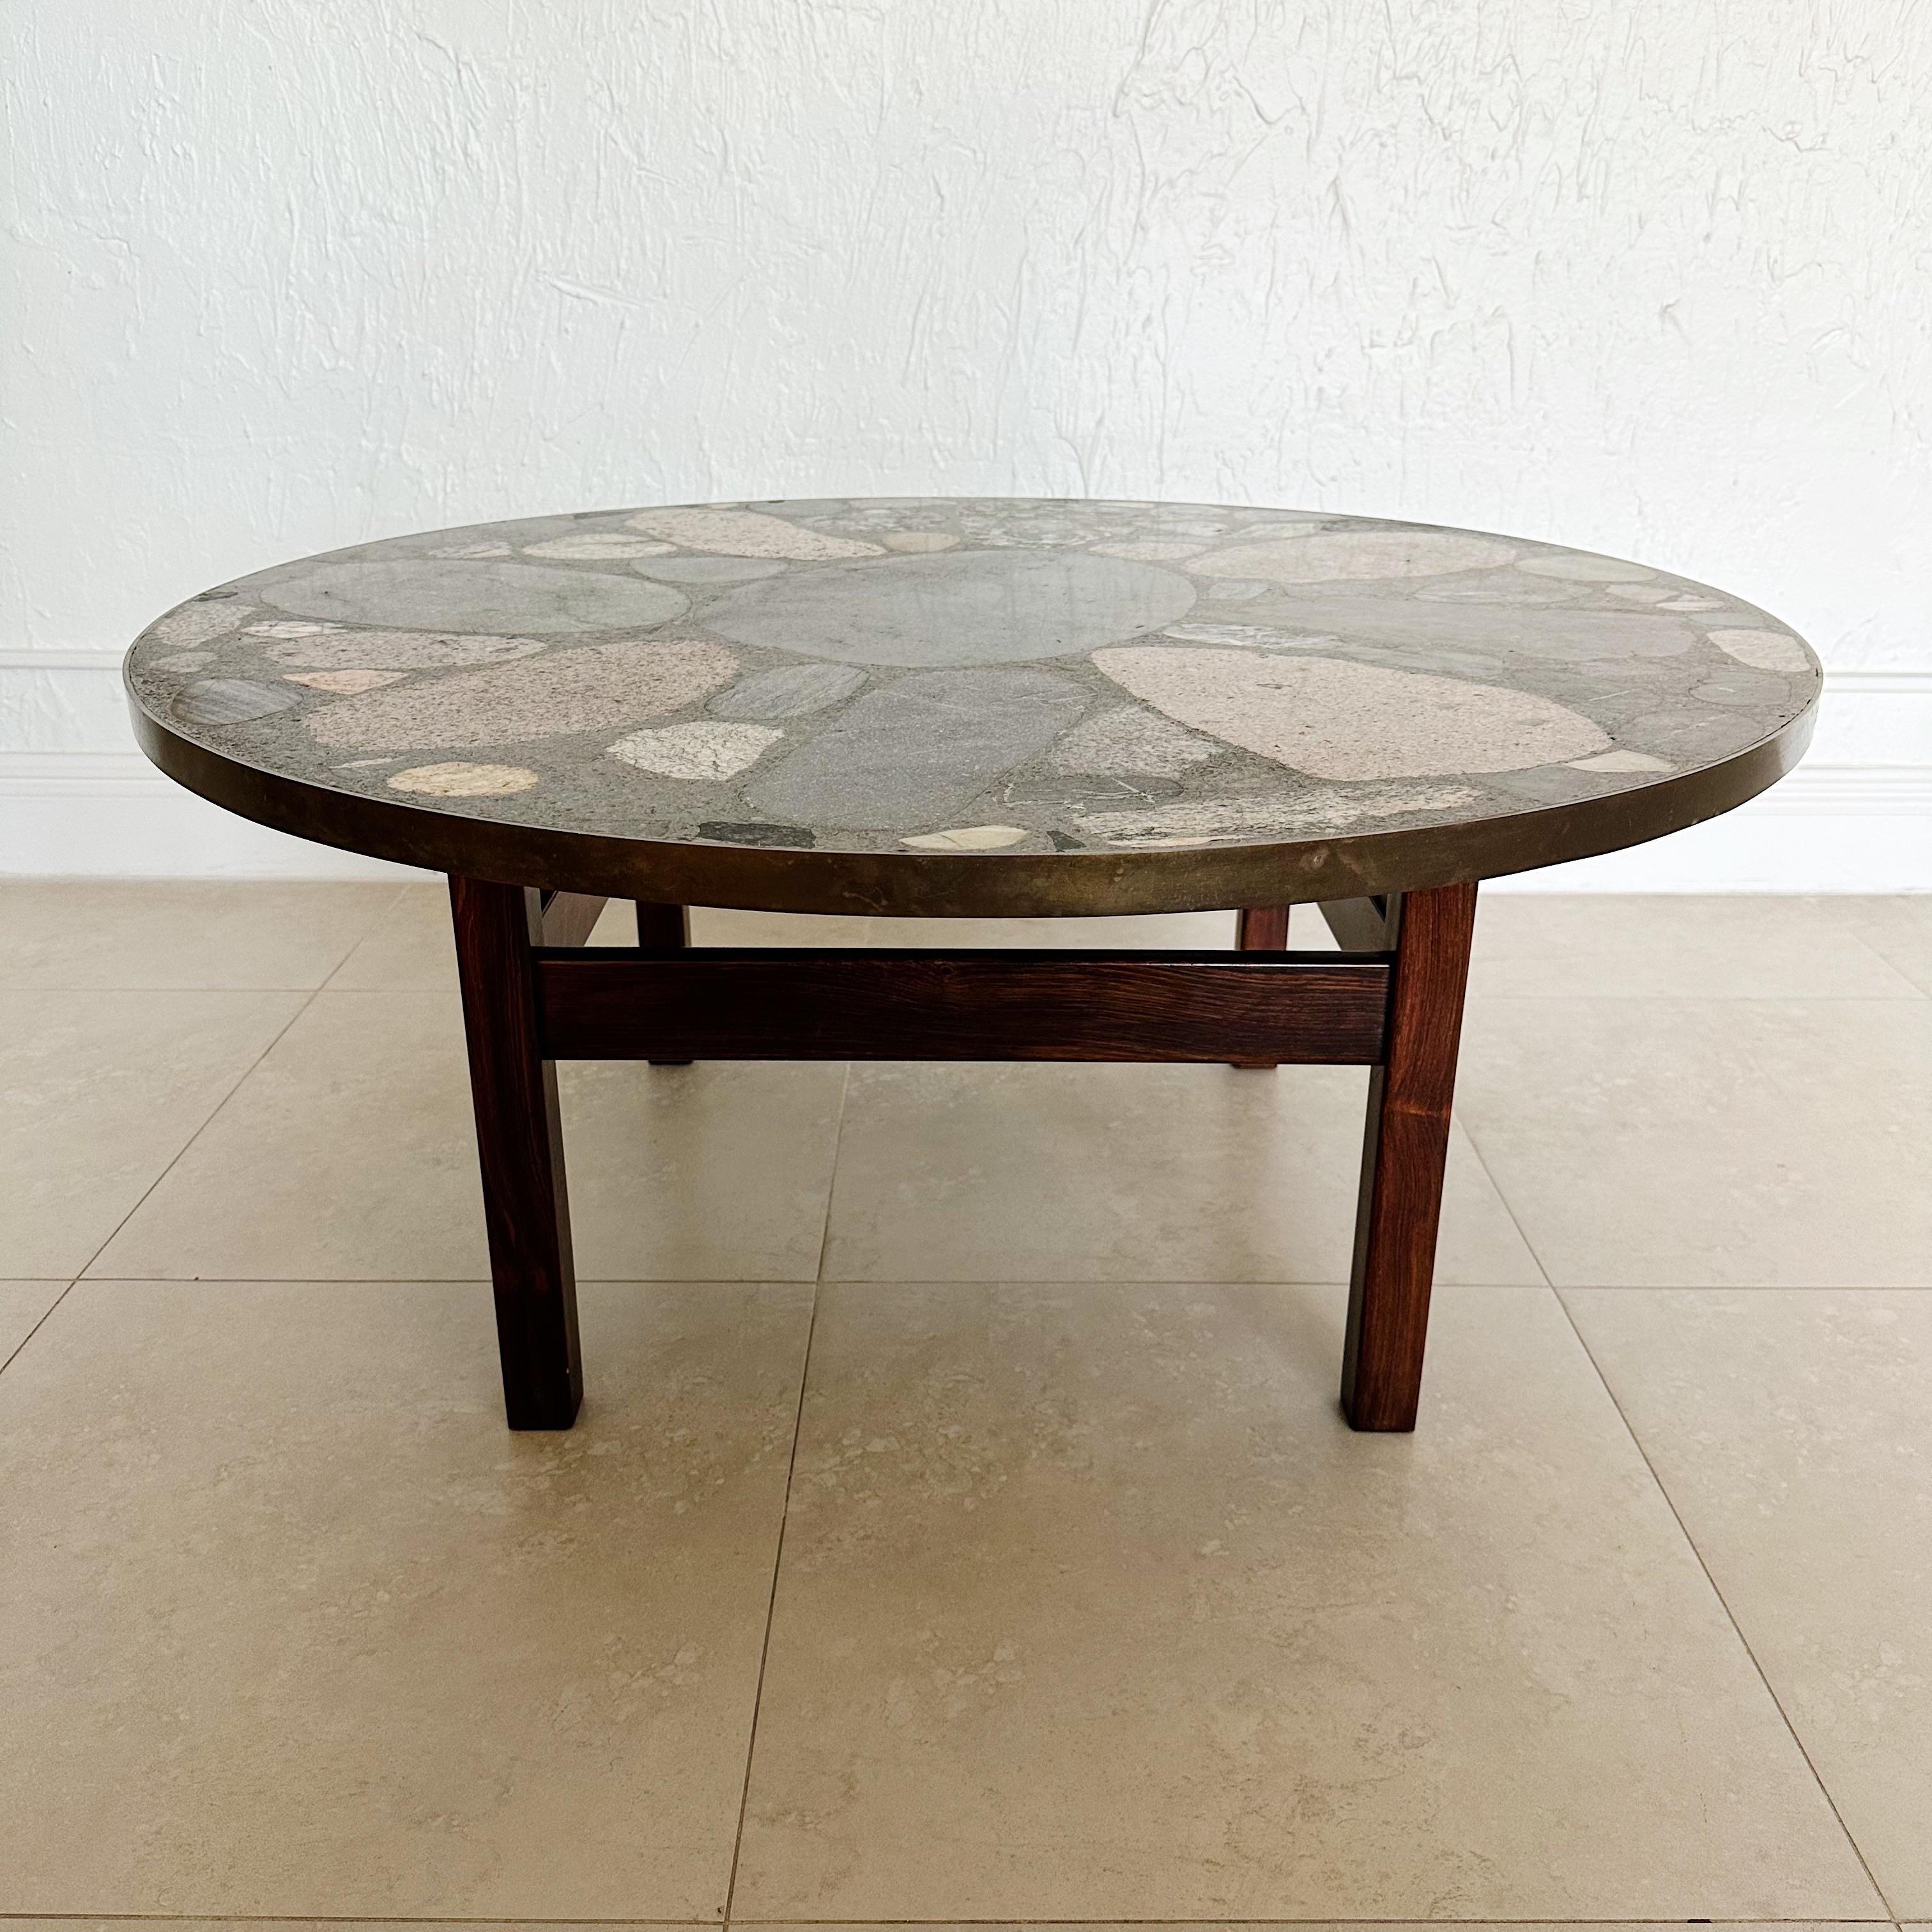 Erling Viksjø was a Norwegian architect and designer best known for his Brutalist architecture and furniture using concrete and stones. This unique circular terrazzo coffee table from the 1960